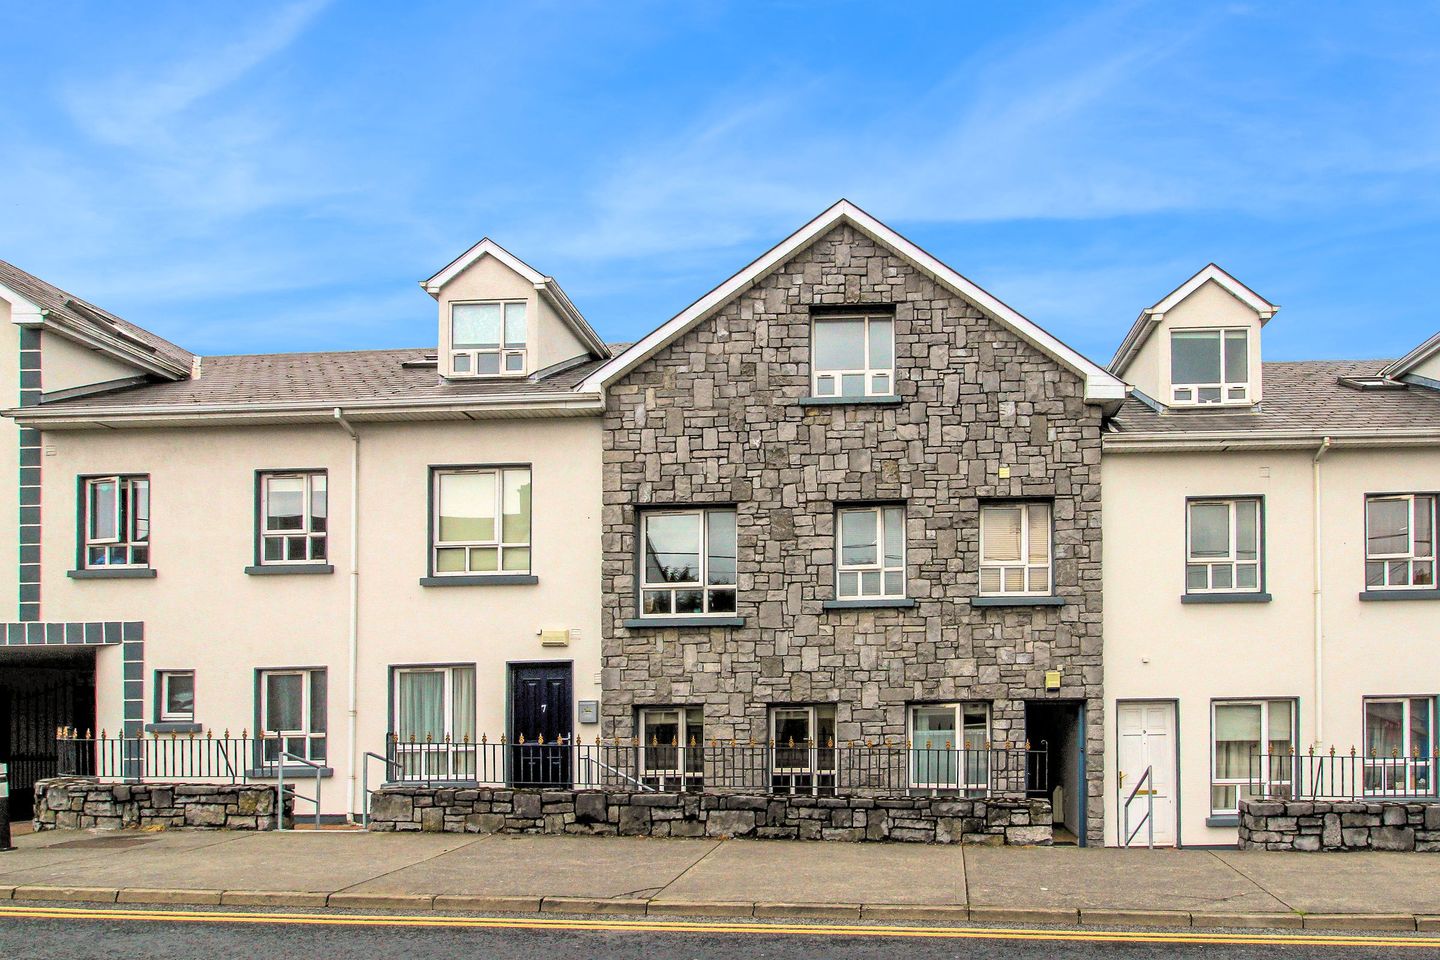 Apartment 8, Larnach, Bohermore, Co. Galway, H91KX33